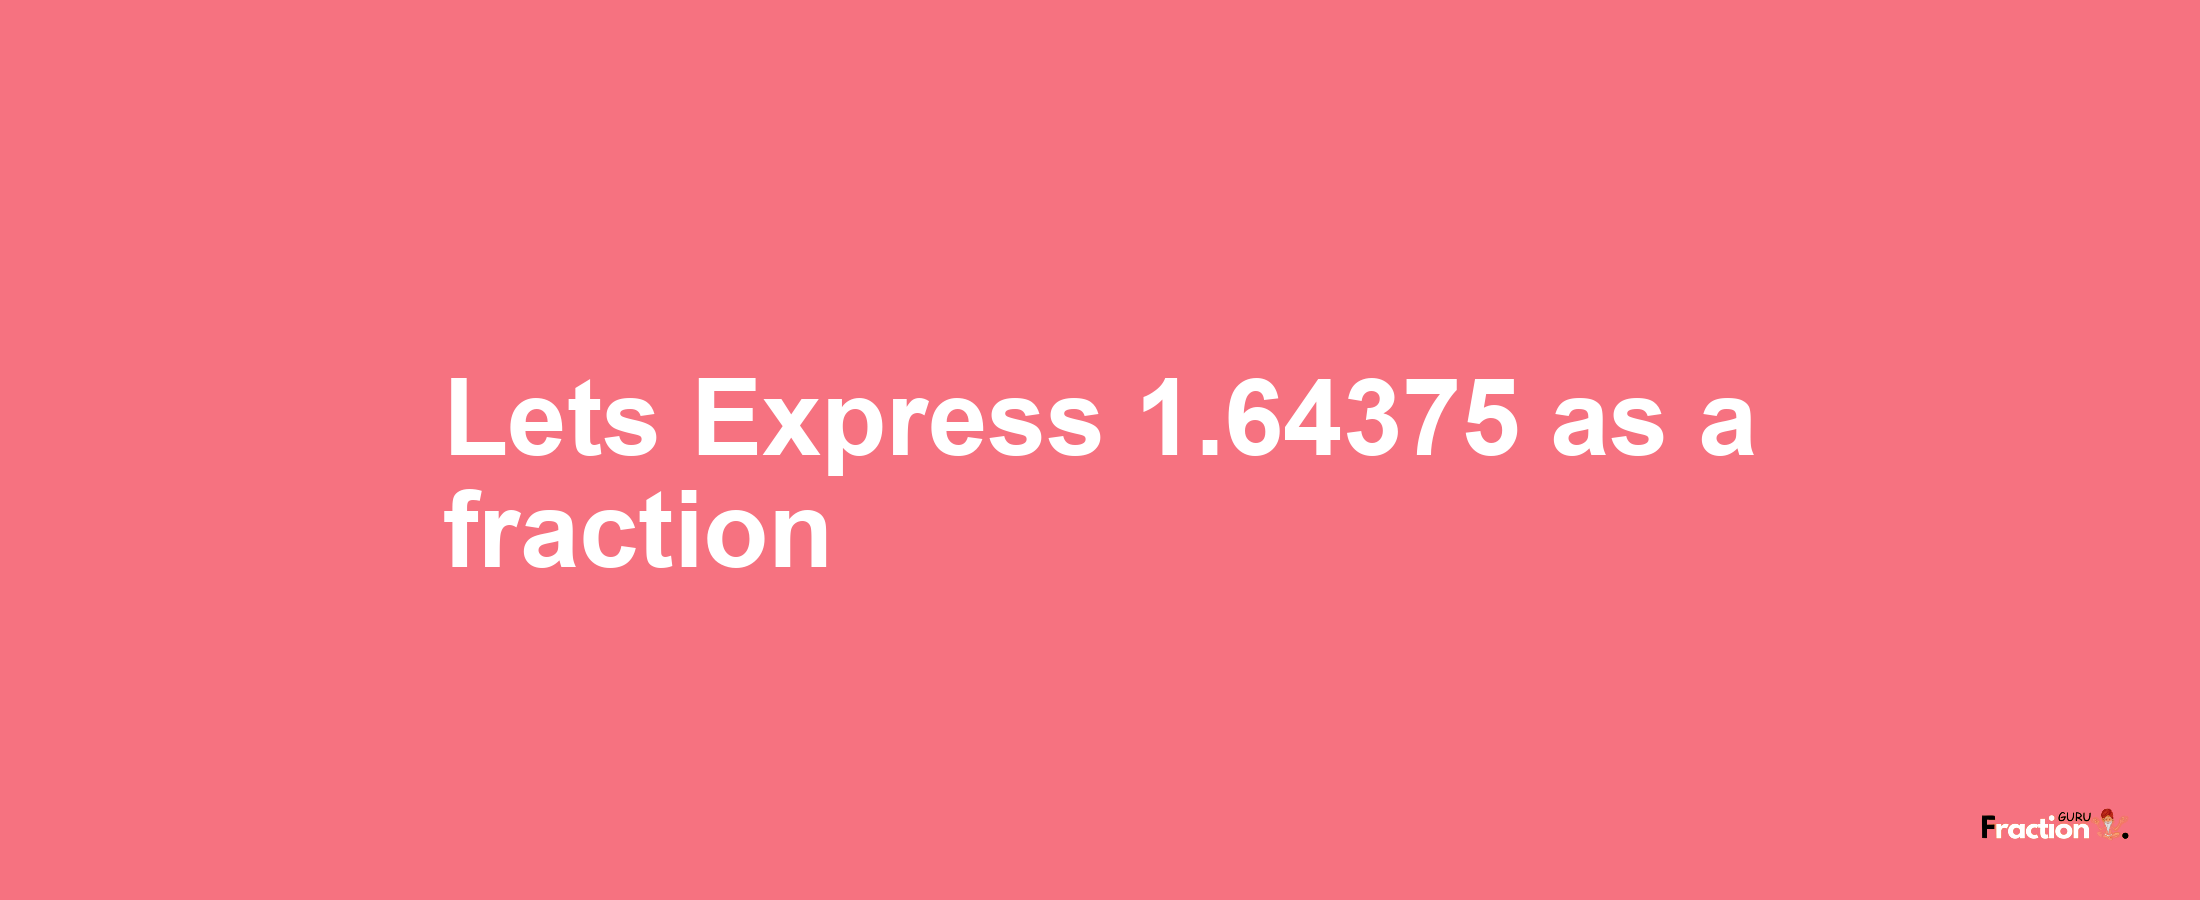 Lets Express 1.64375 as afraction